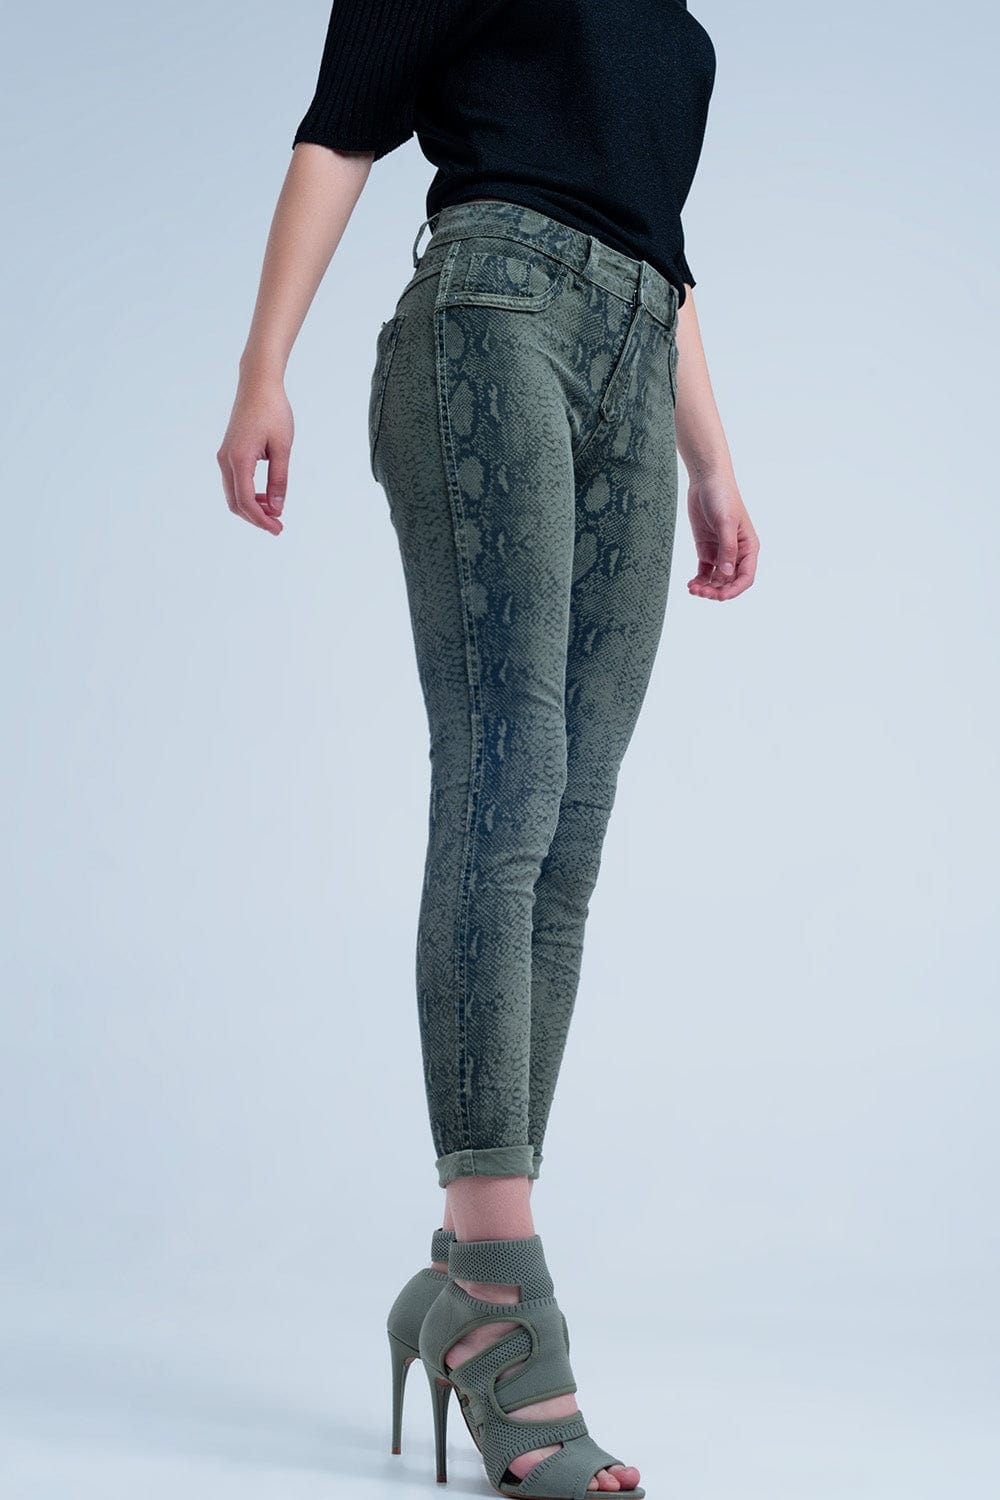 Q2 Women's Jean Green Skinny Reversible Jeans with Snake Print